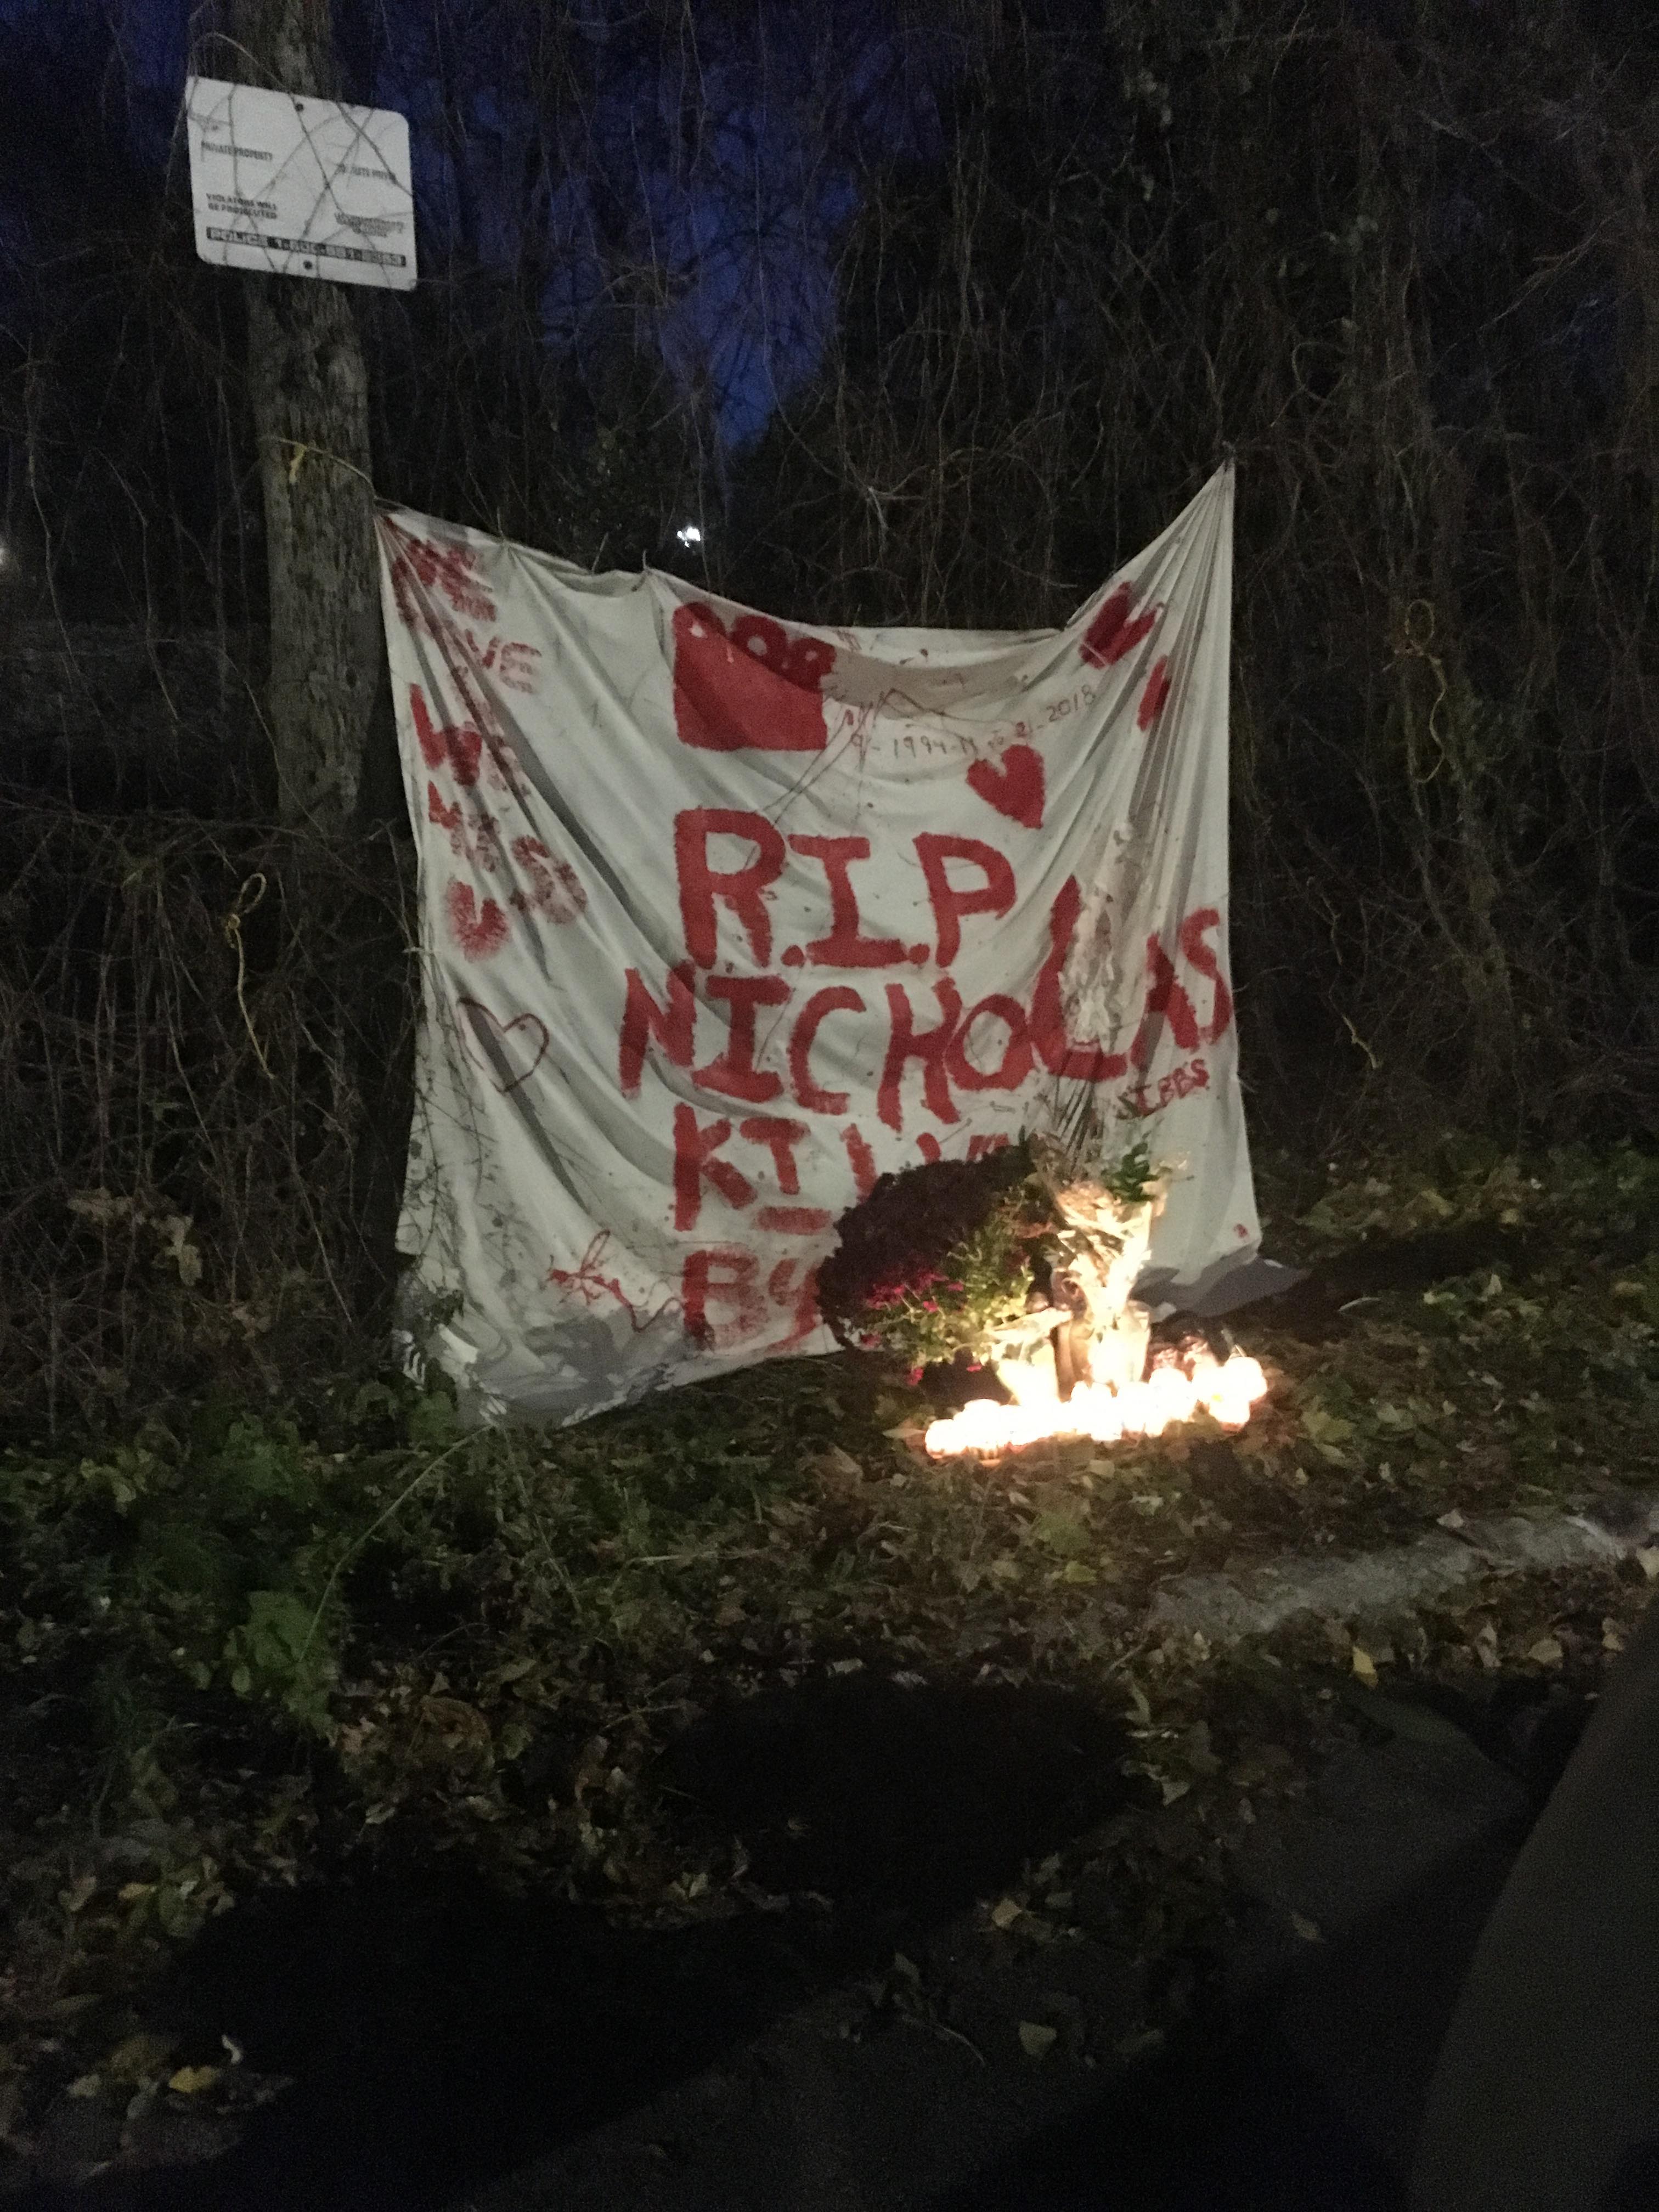 Banner along a fence along the train tracks at Maisonneuve and Montclair, NDG (spot where Gibbs was killed). The banner reads RIP Nicholas. Candles are lit below the banner.